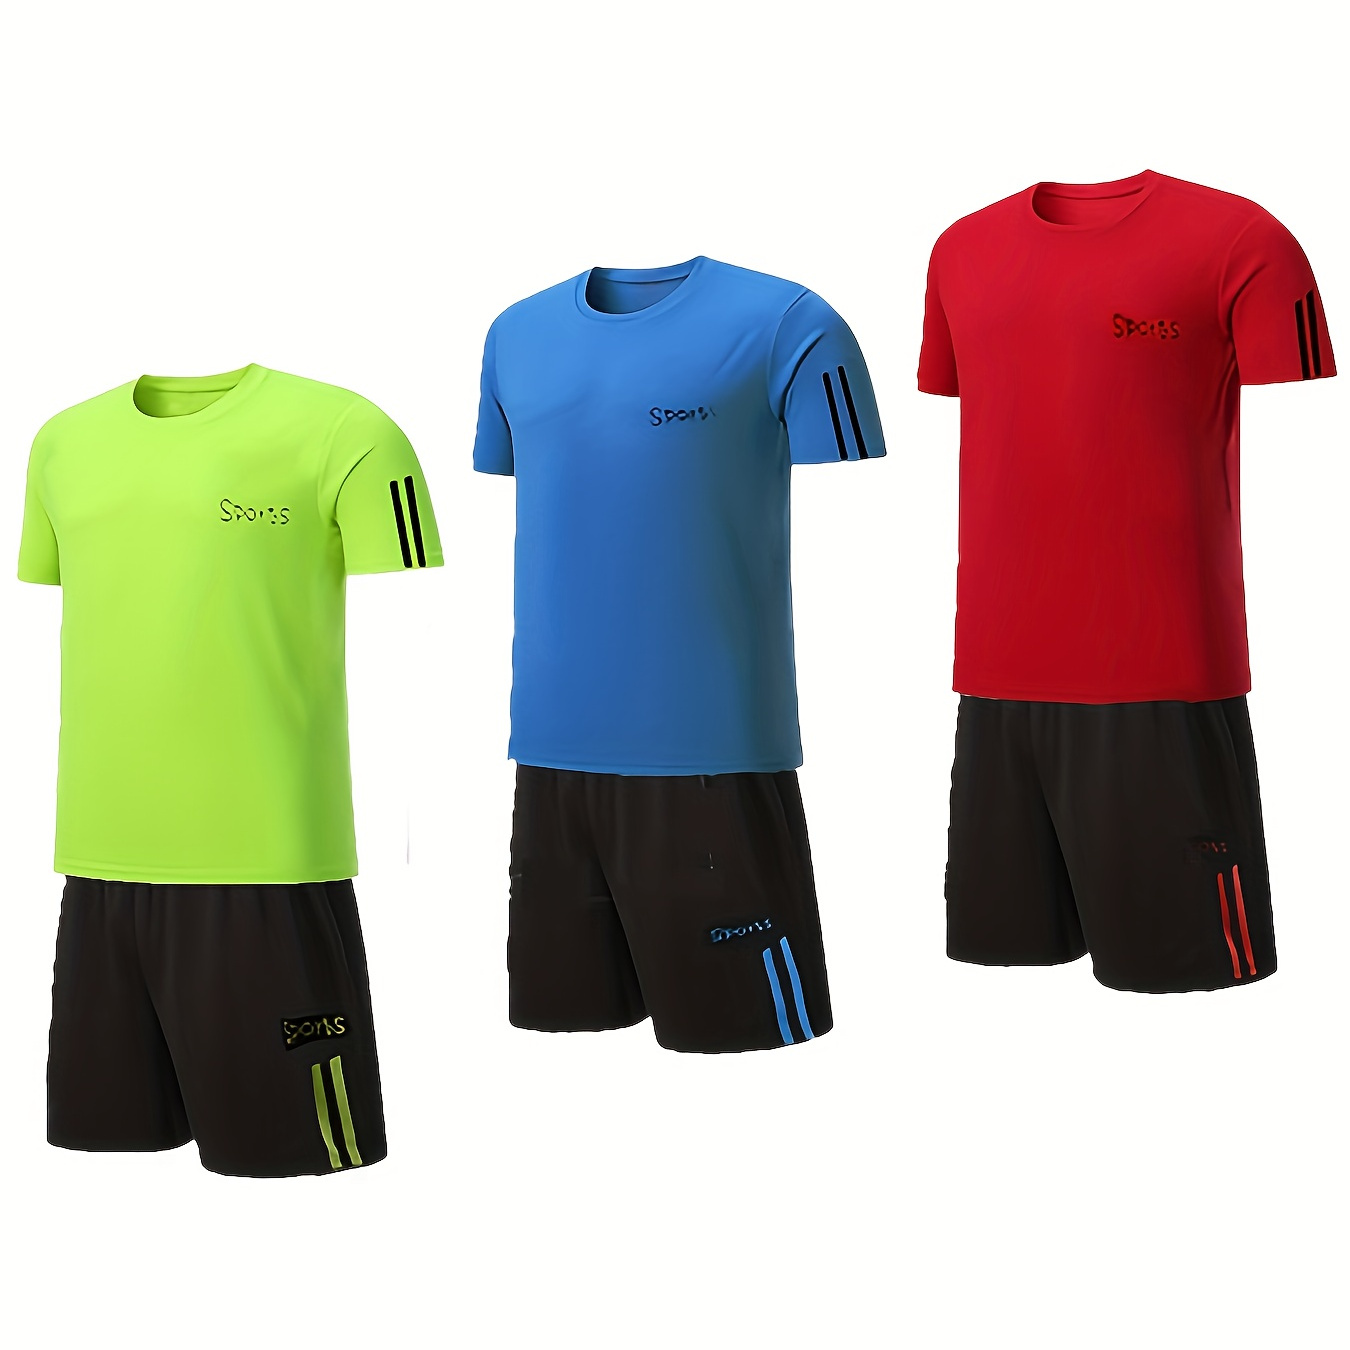 

6pcs - 3 Outfits Set, Kids Short Sleeve Basketball Suit, Boys Breathable Quick Dry Summer T-shirt & Track Shorts Boys Athletic Outfit For Training